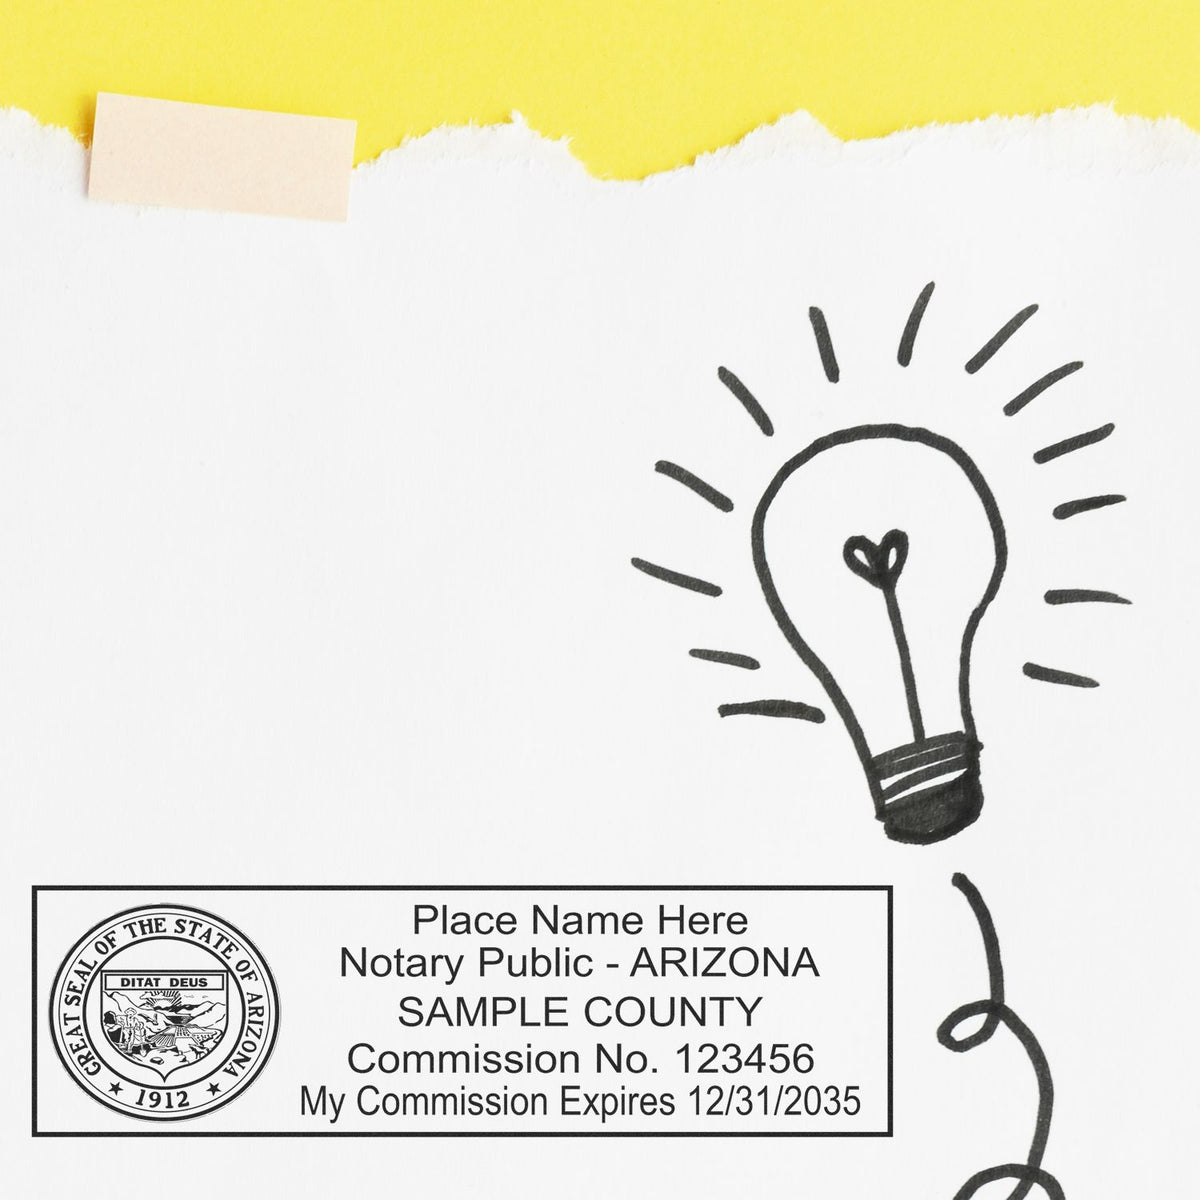 A lifestyle photo showing a stamped image of the MaxLight Premium Pre-Inked Arizona State Seal Notarial Stamp on a piece of paper